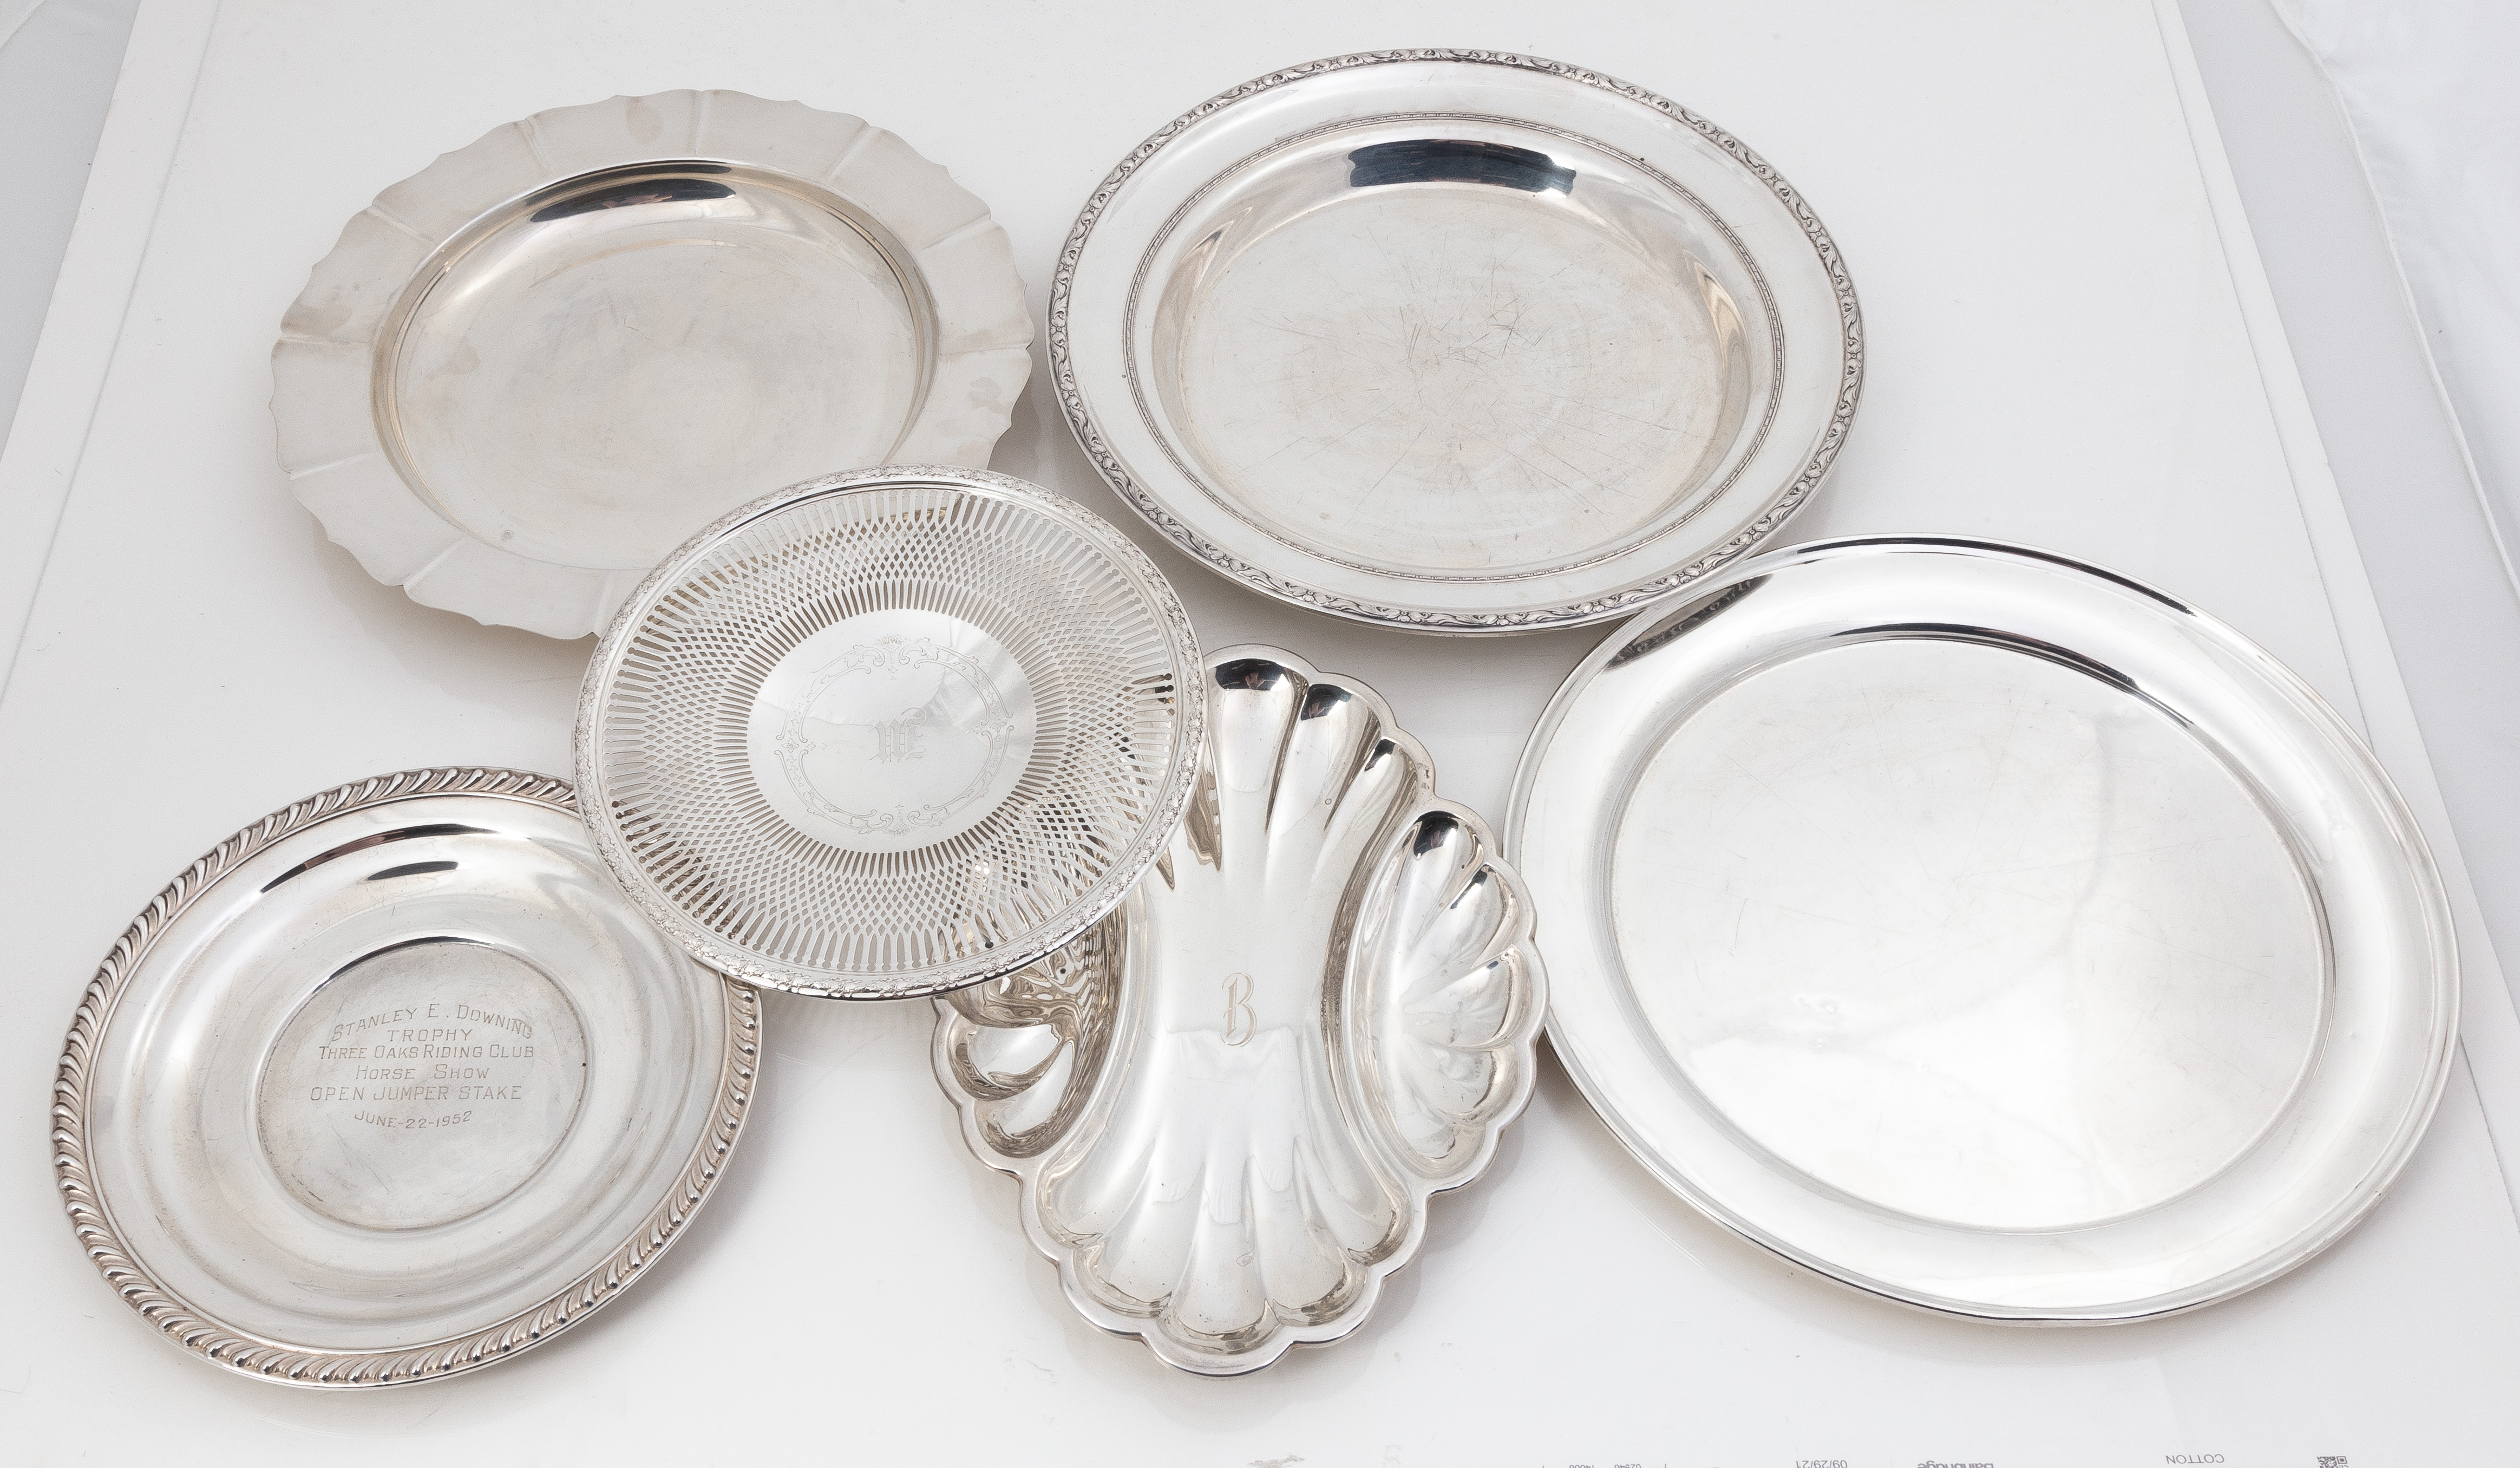 GROUP OF STERLING SILVER TRAYS 3c7f65